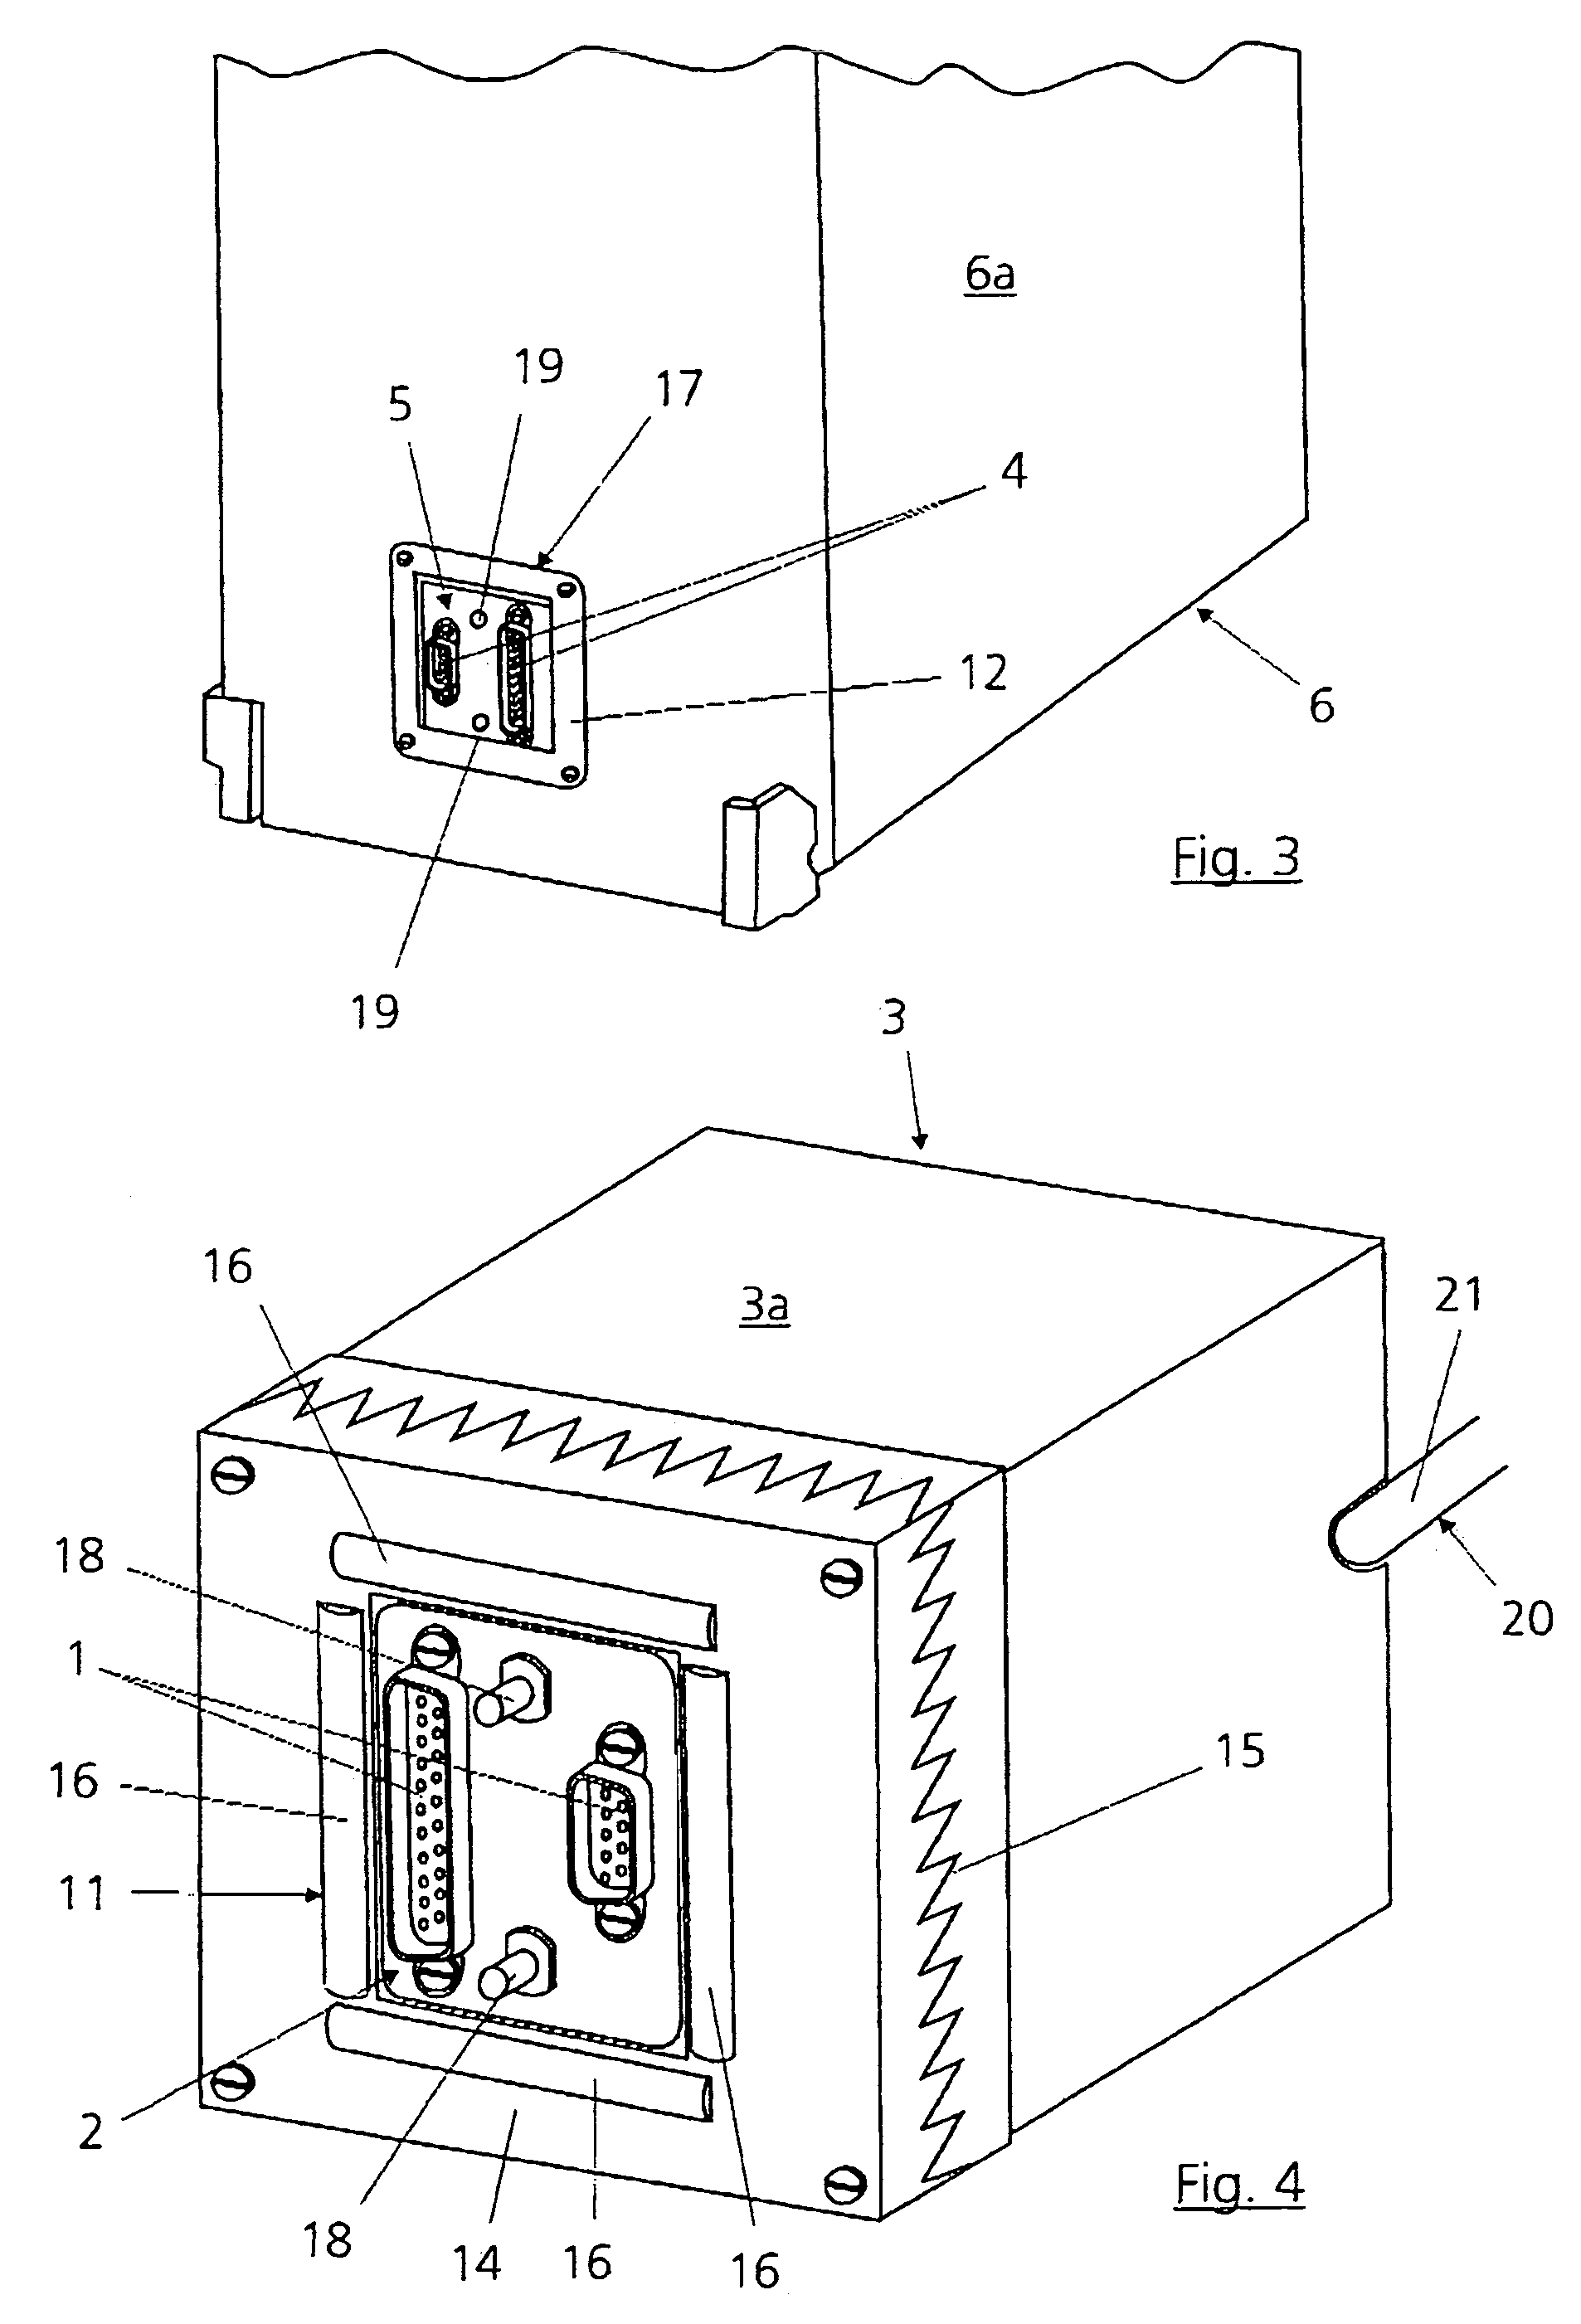 Apparatus for production of an electromagnetically shielded connection